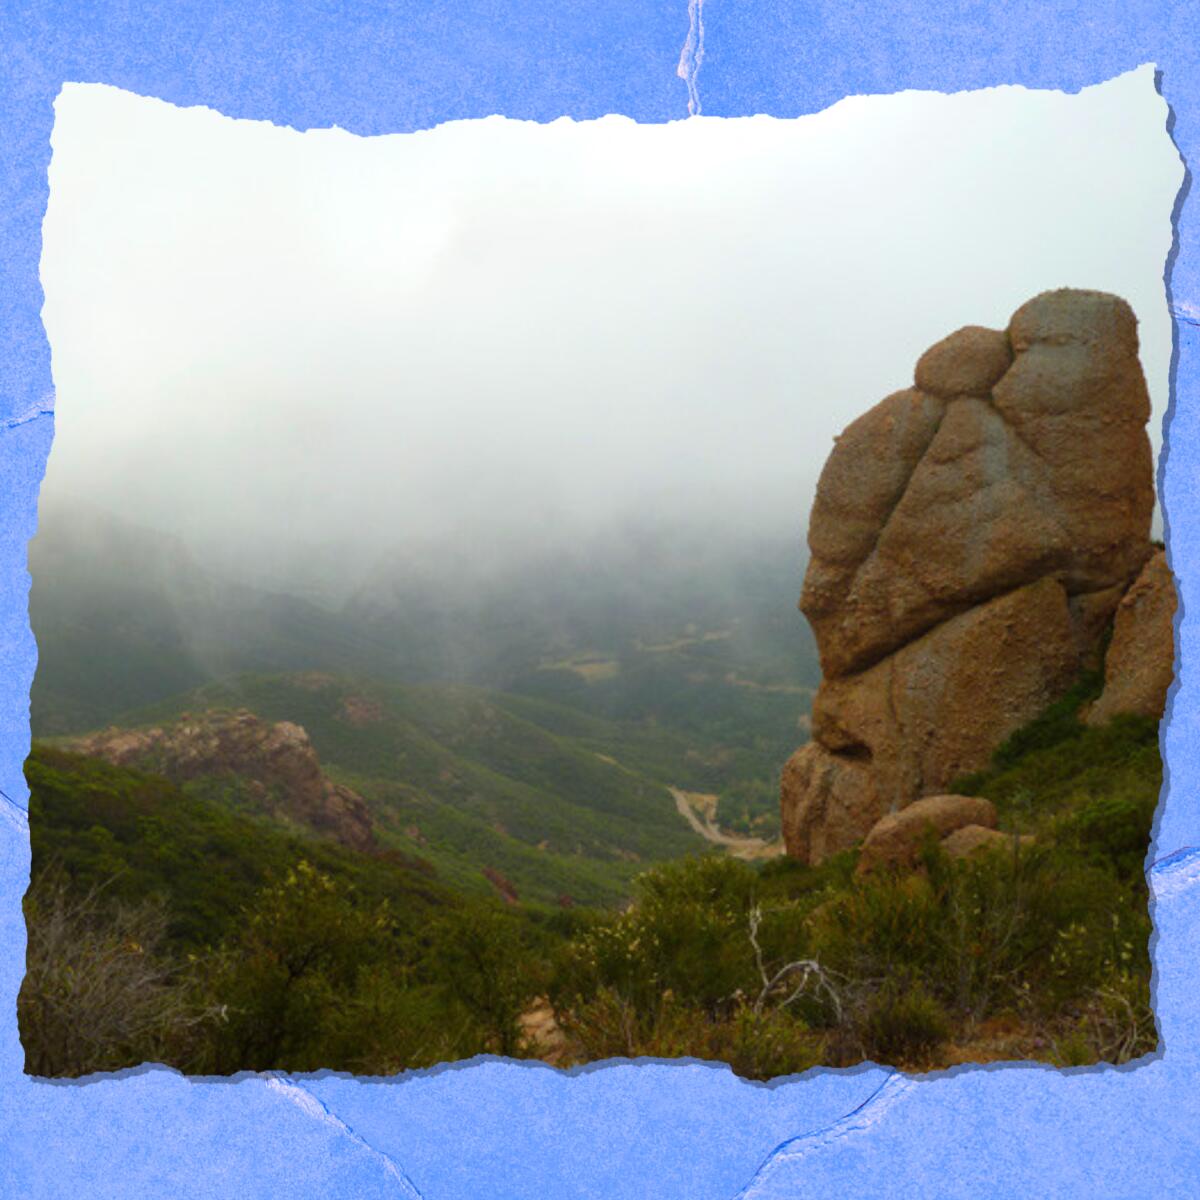 Rocky formations are seen amid fog.